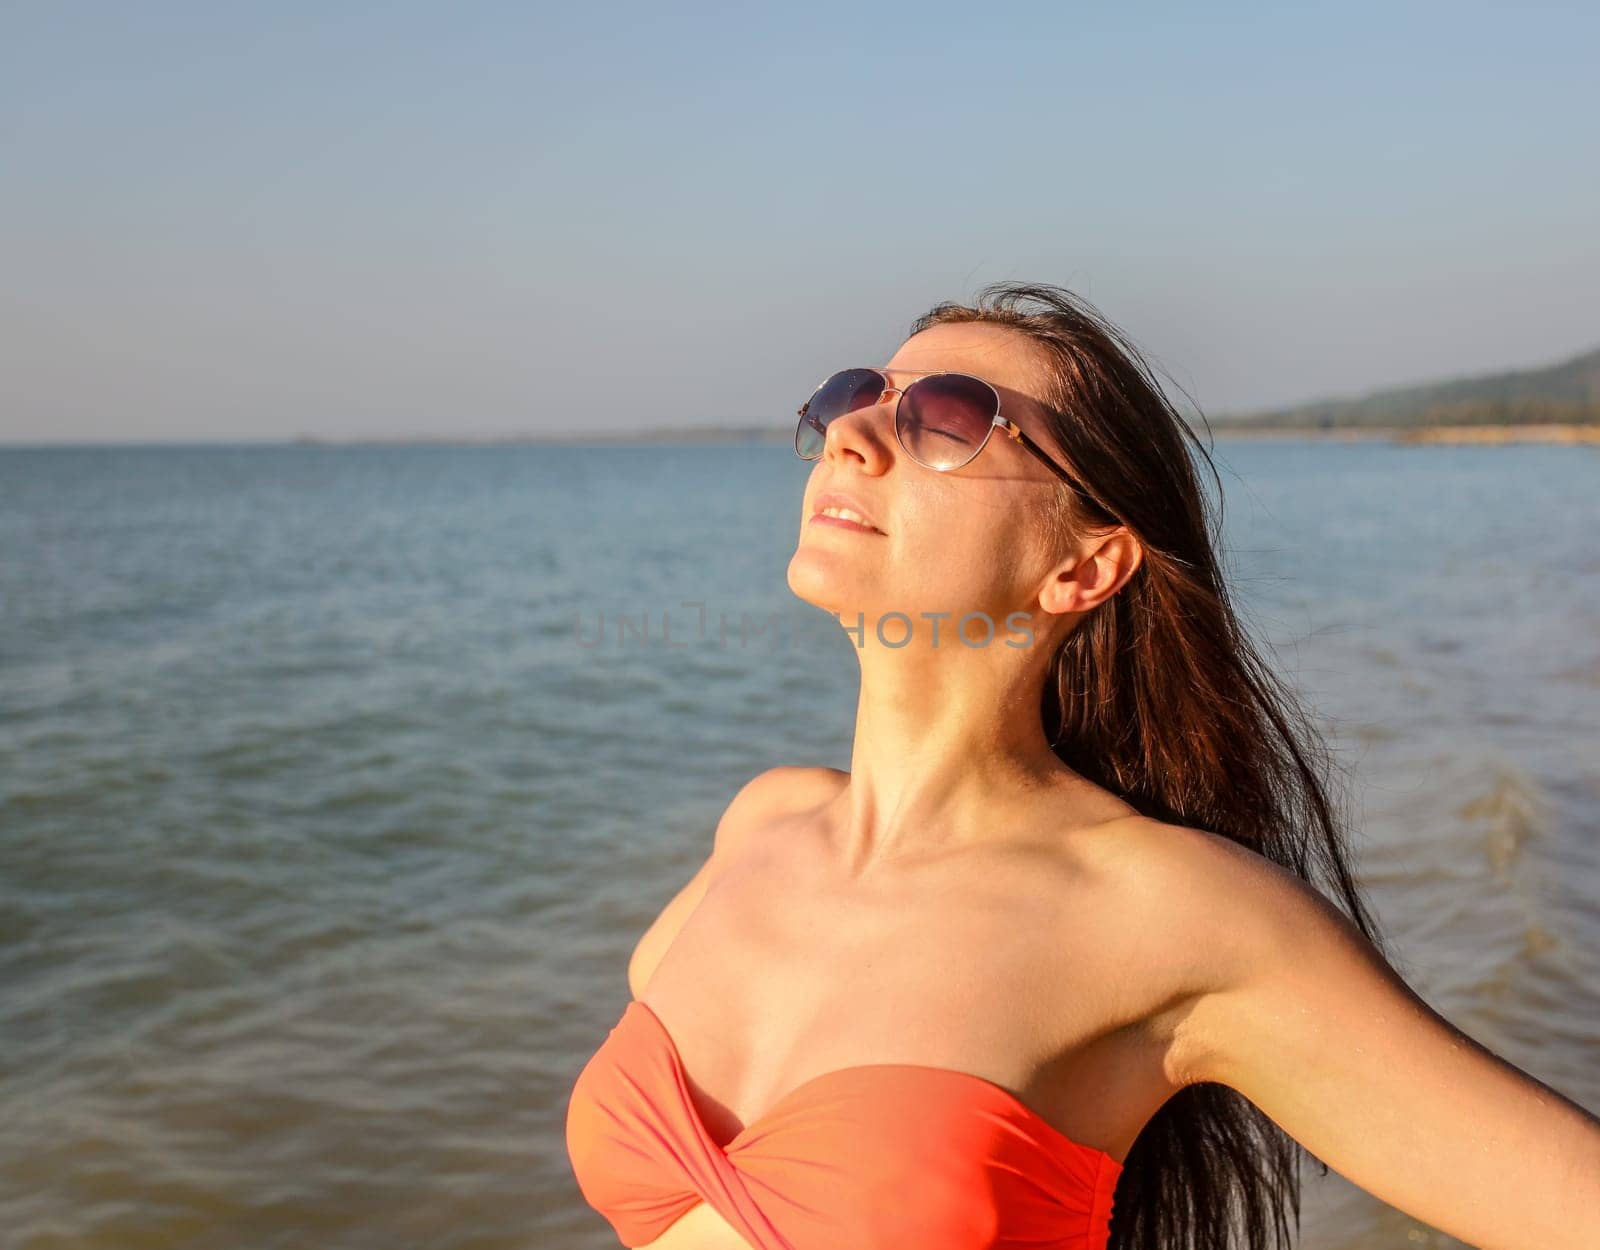 Young woman in red bikini and sunglasses, arms spread, looking into and enjoying afternoon sun, sea behind. Detail on head and top of her body.